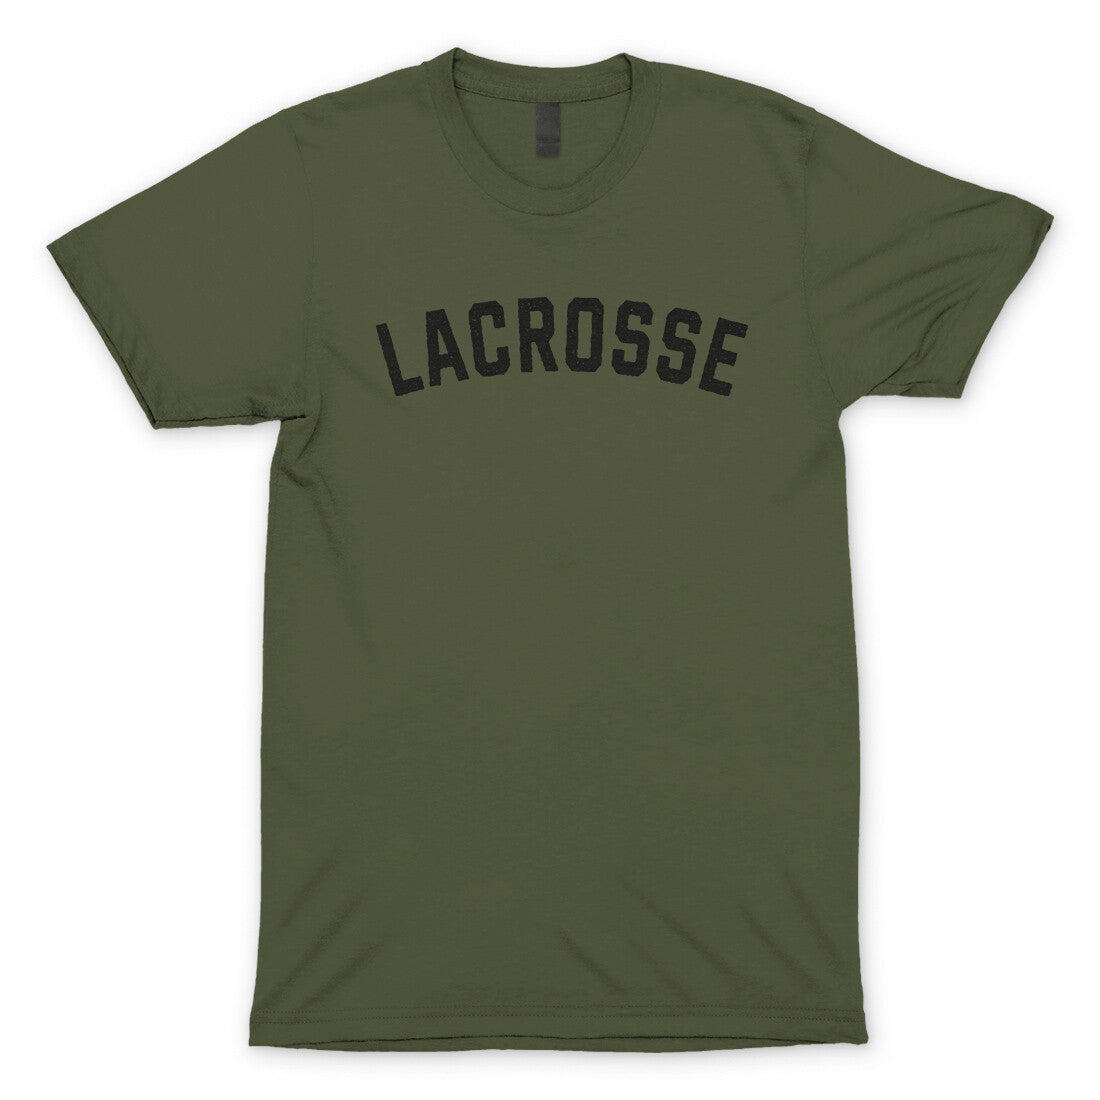 Lacrosse in Military Green Color